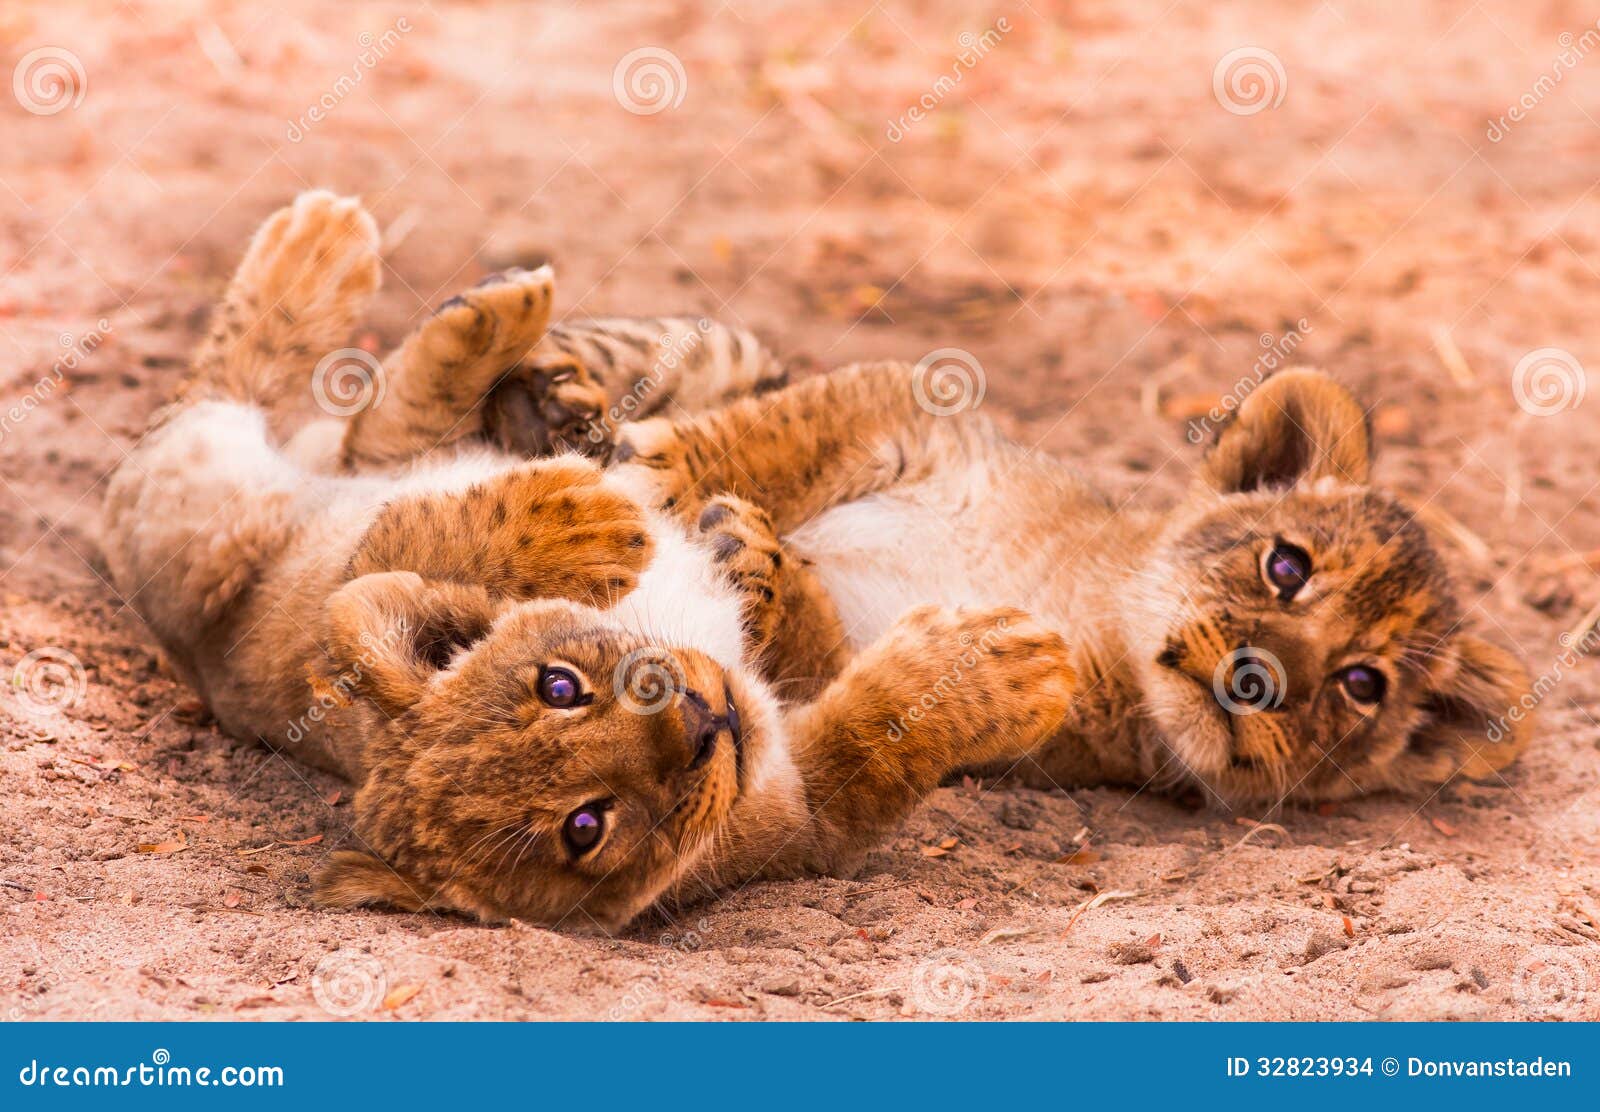 Cute Lion Cubs stock photo. Image of male, adorable, beautiful ...